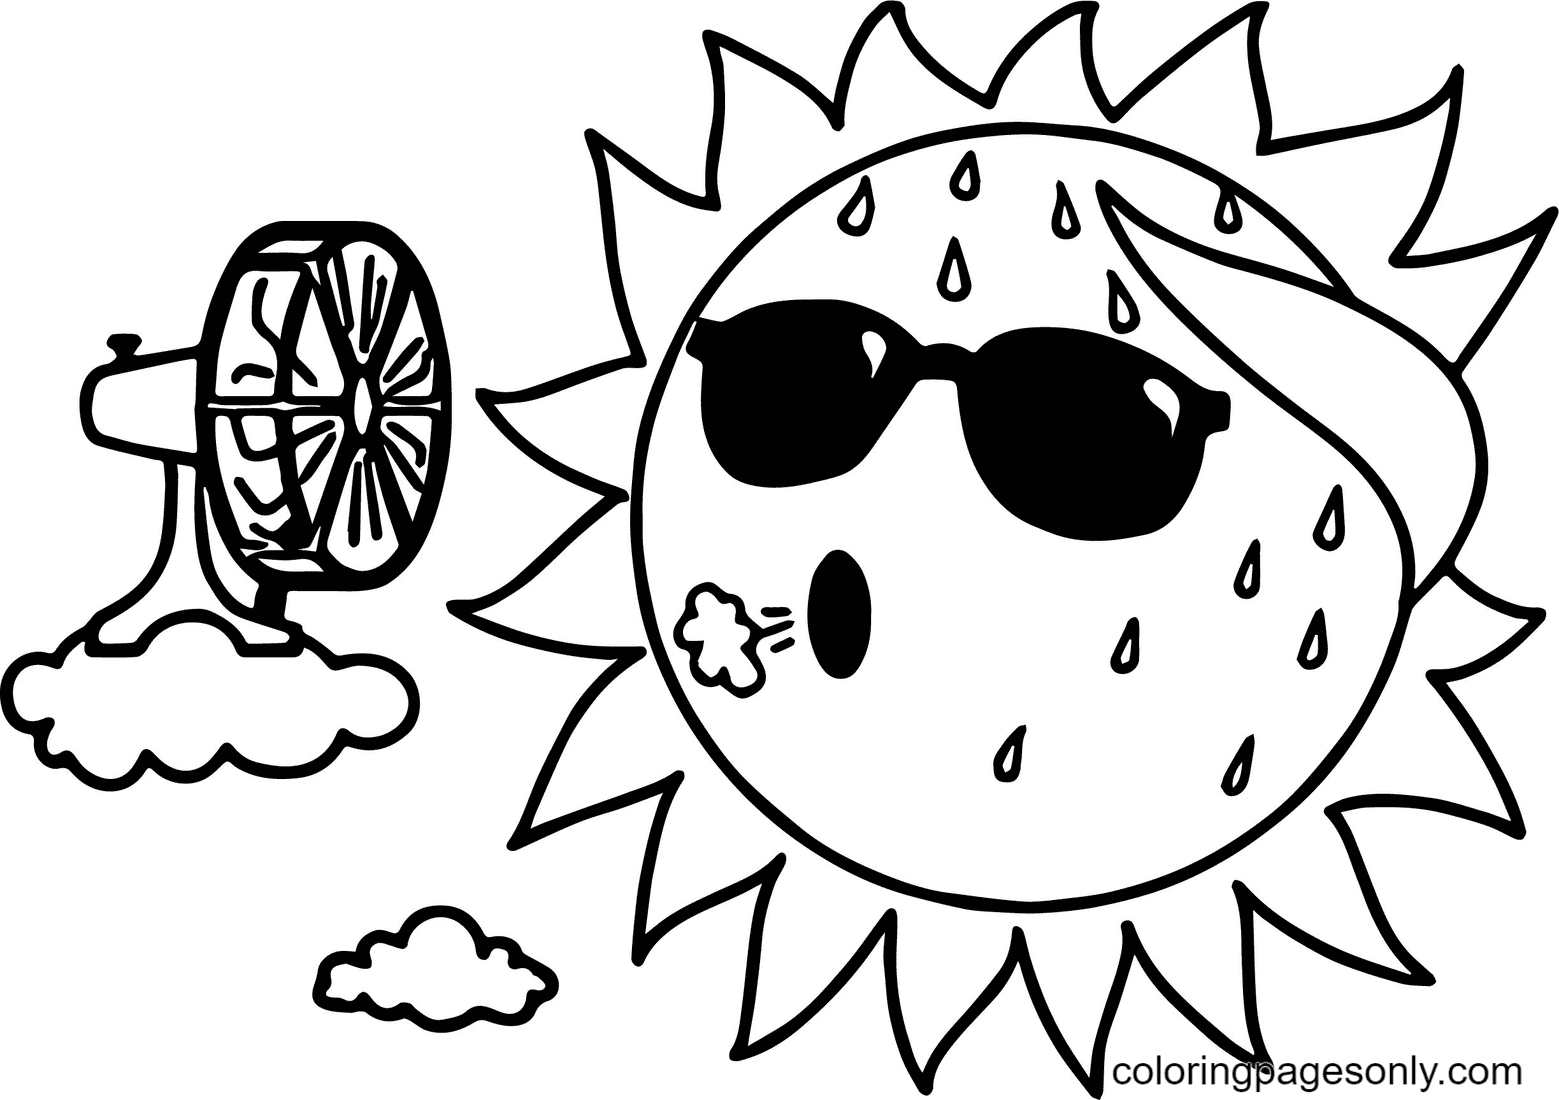 The Sun And The Fan Coloring Pages